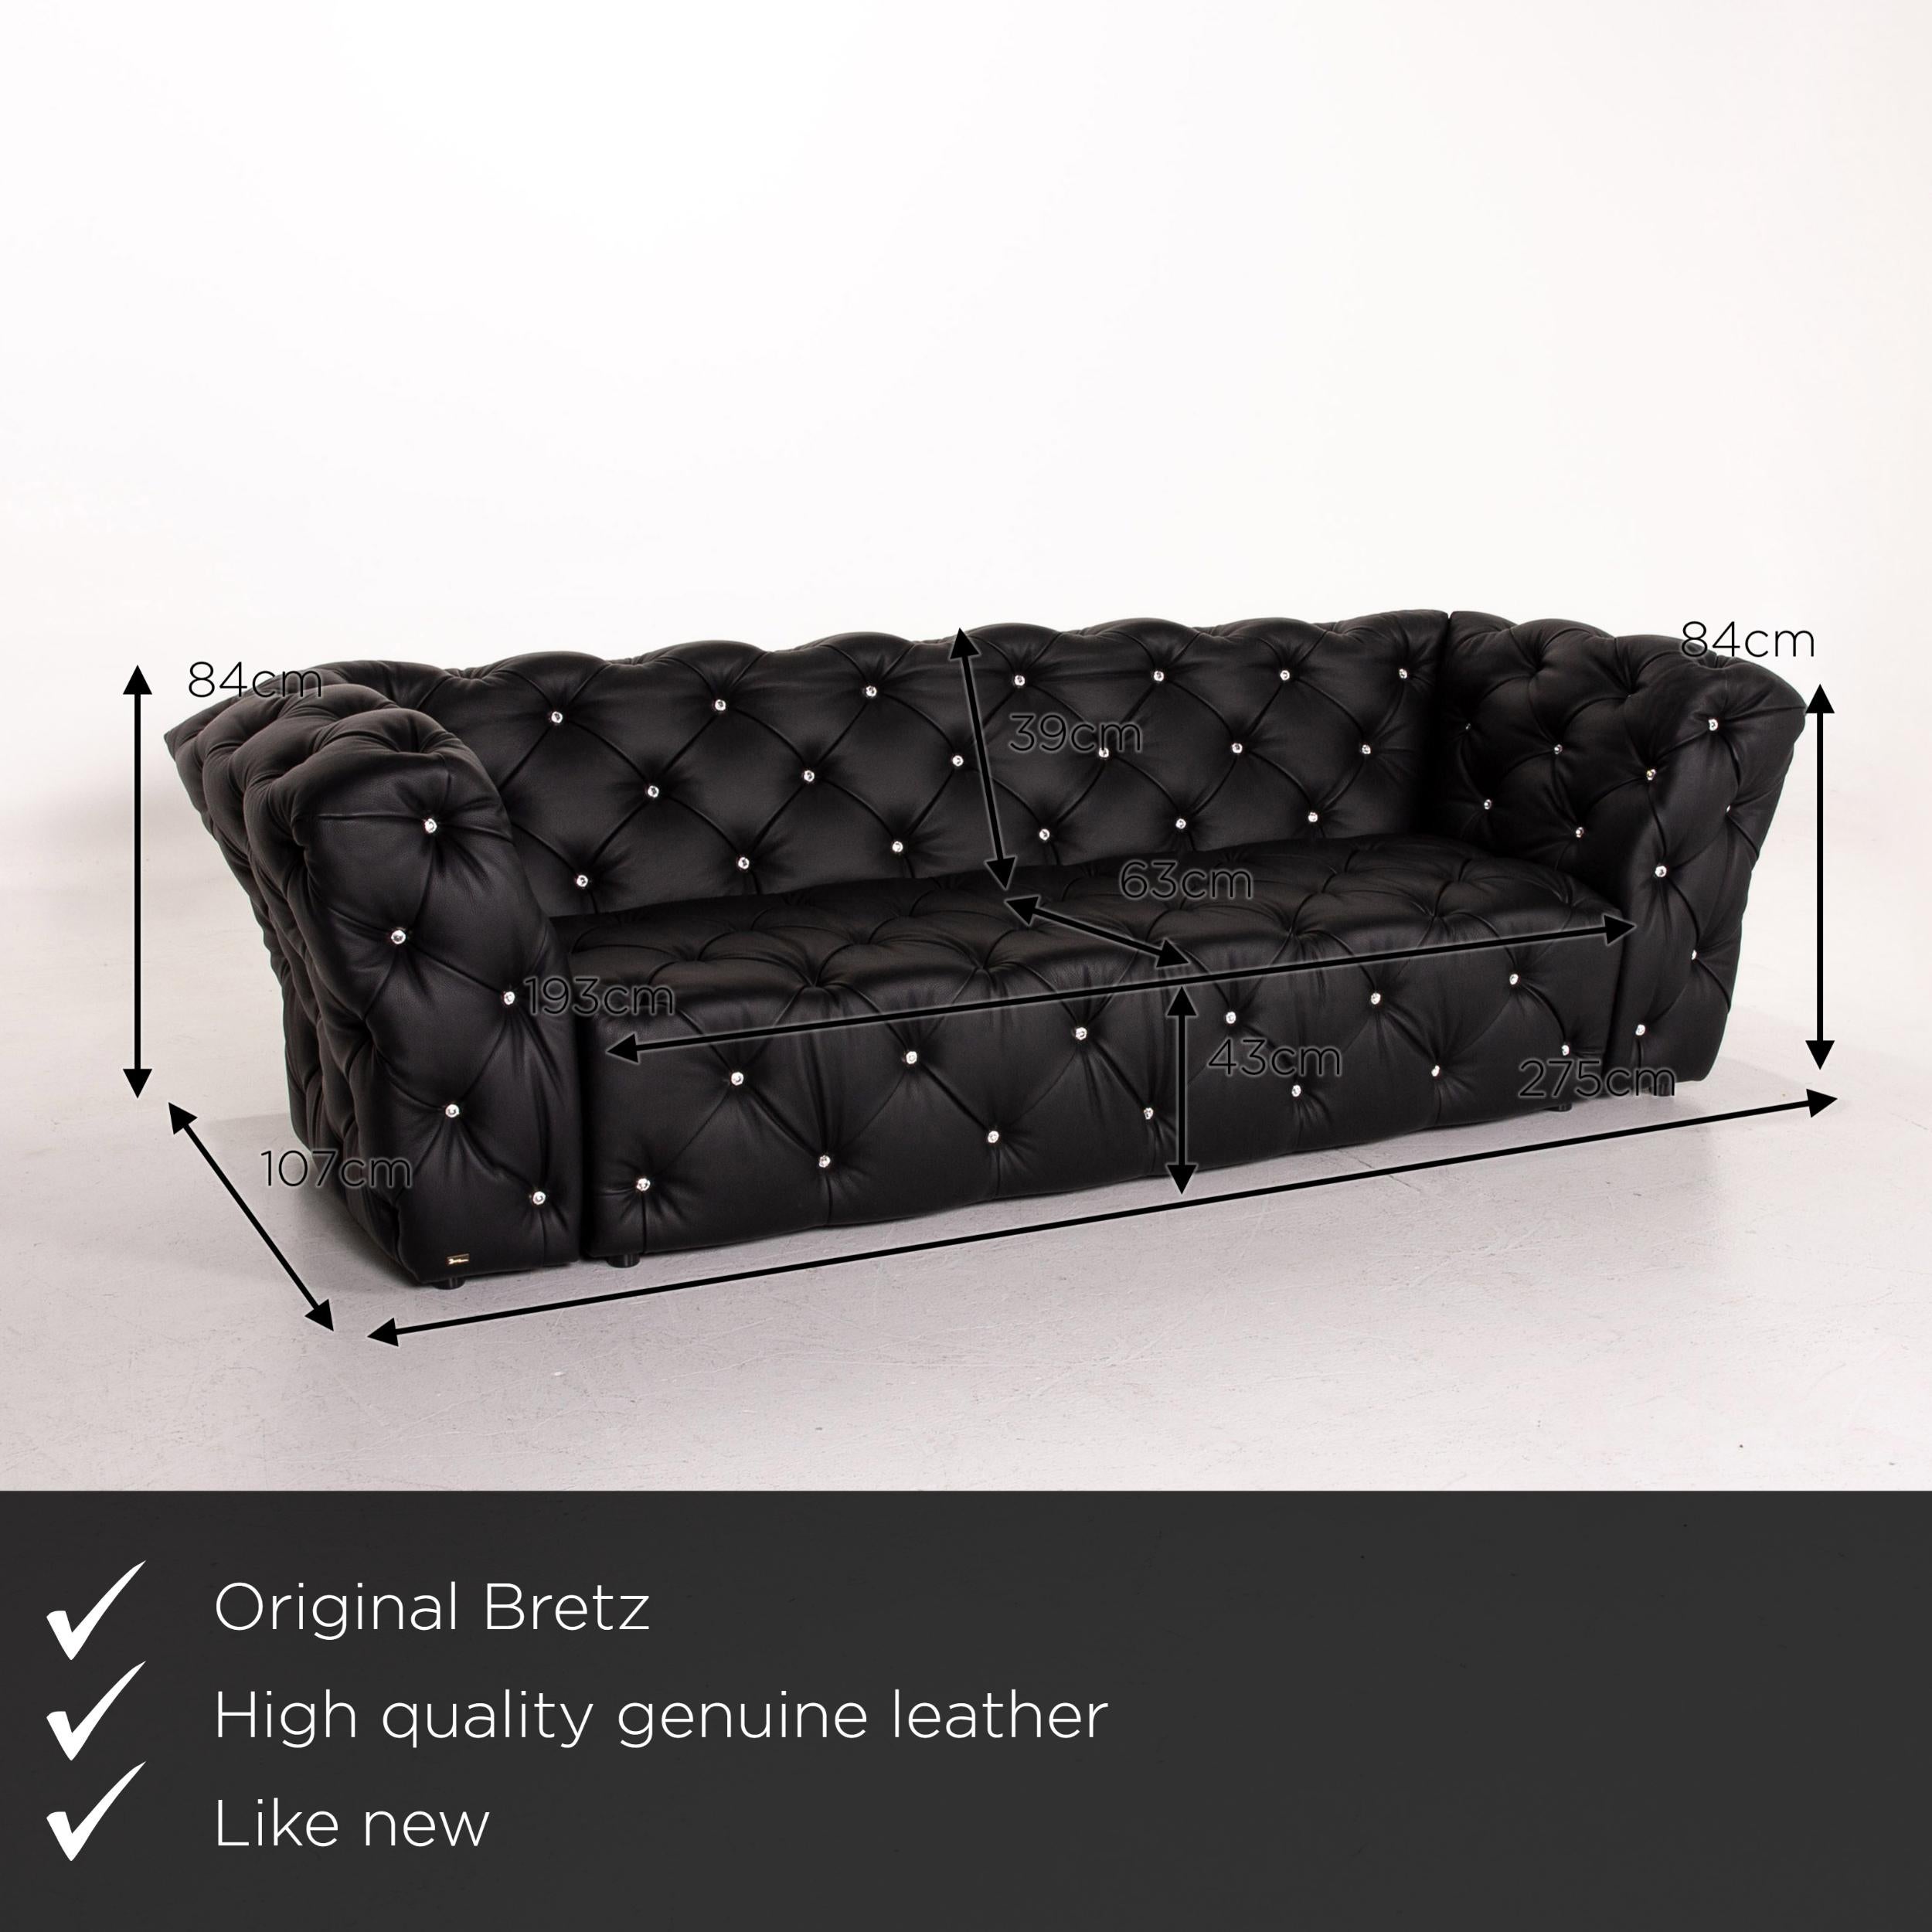 We present to you a Bretz Marilyn leather sofa black three seater couch.
 

 Product measurements in centimeters:
 

Depth 107
Width 275
Height 84
Seat height 43
Rest height 84
Seat depth 63
Seat width 193
Back height 39.
 